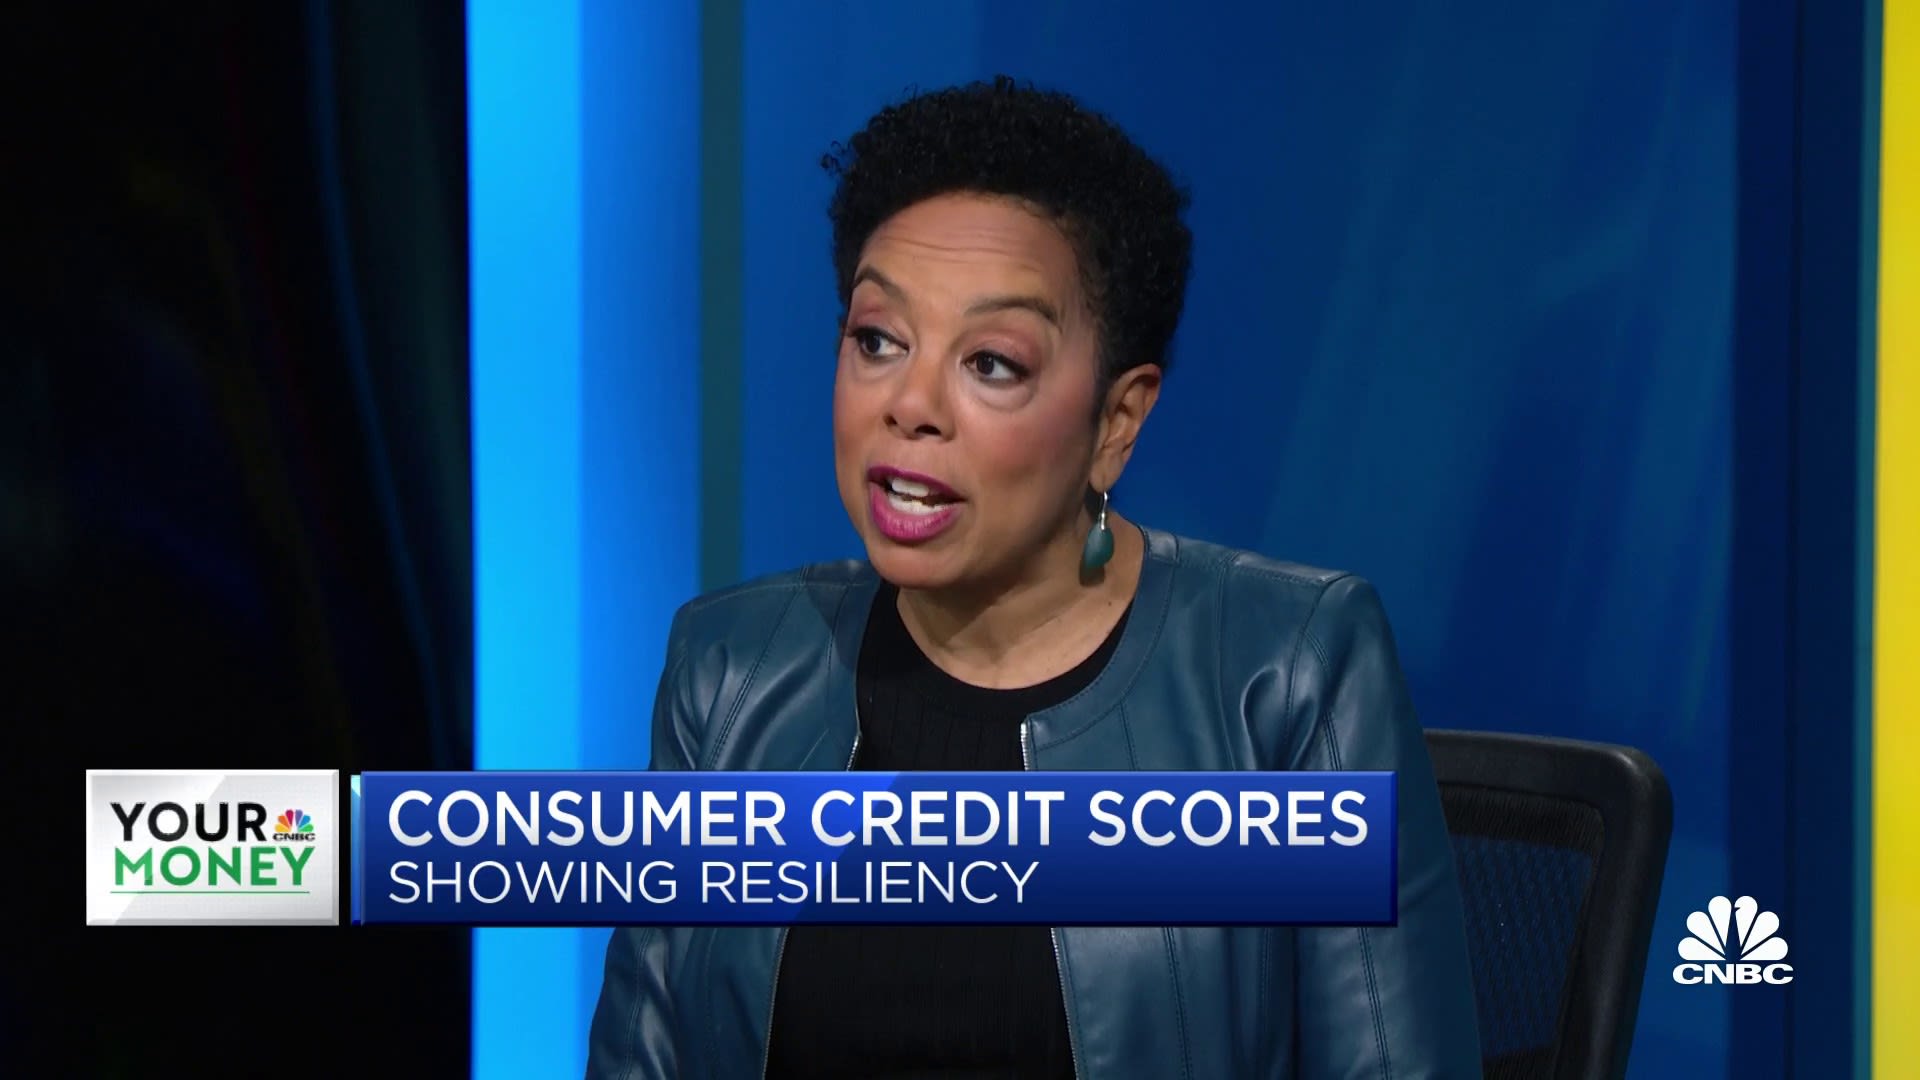 Consumer's credit scores have held up despite putting on more debt